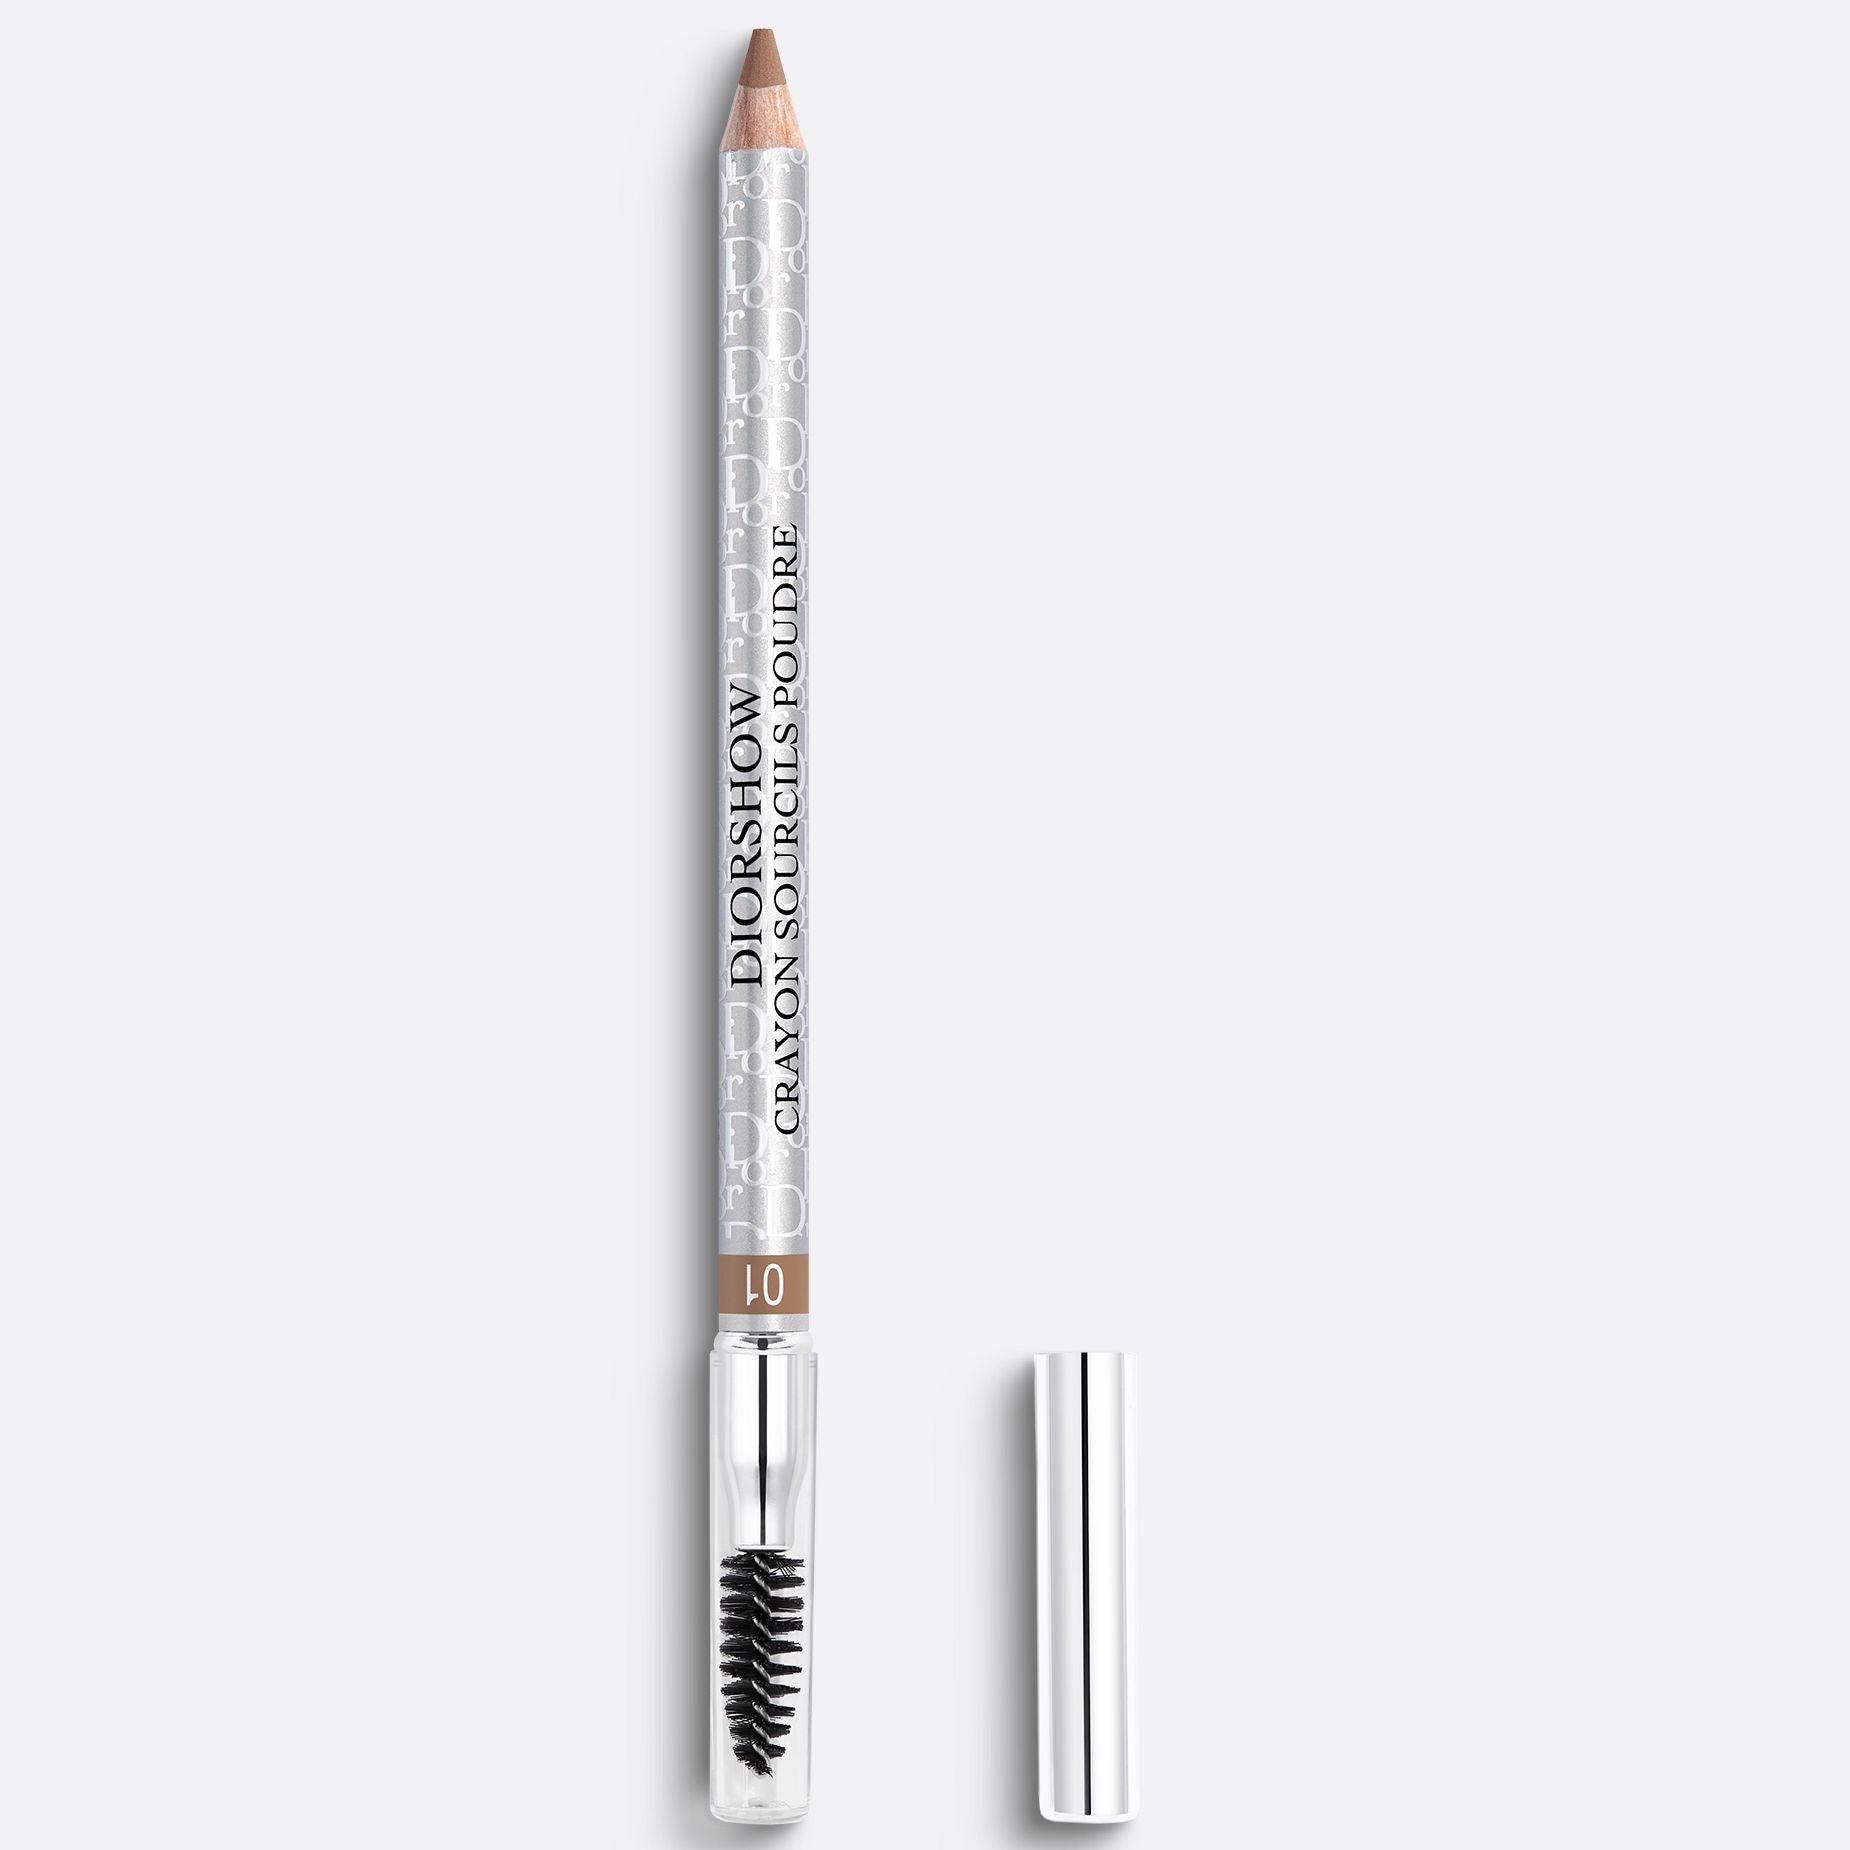 Diorshow Crayon Sourcils Poudre Waterproof Eyebrow Pencil - Natural finish - With Sharpener